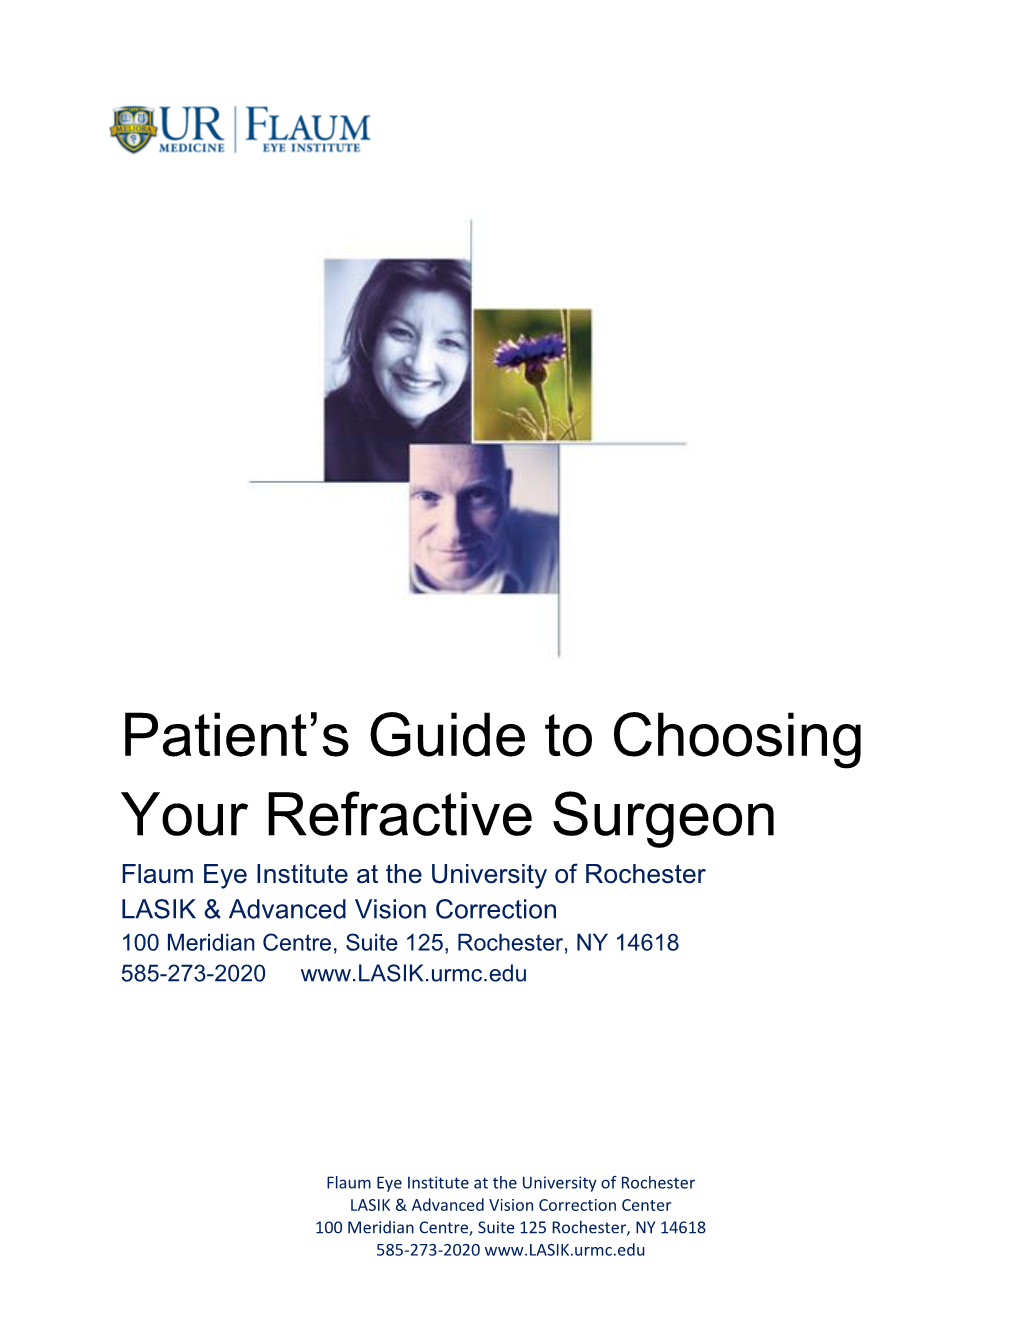 Patient's Guide to Choosing Your Refractive Surgeon